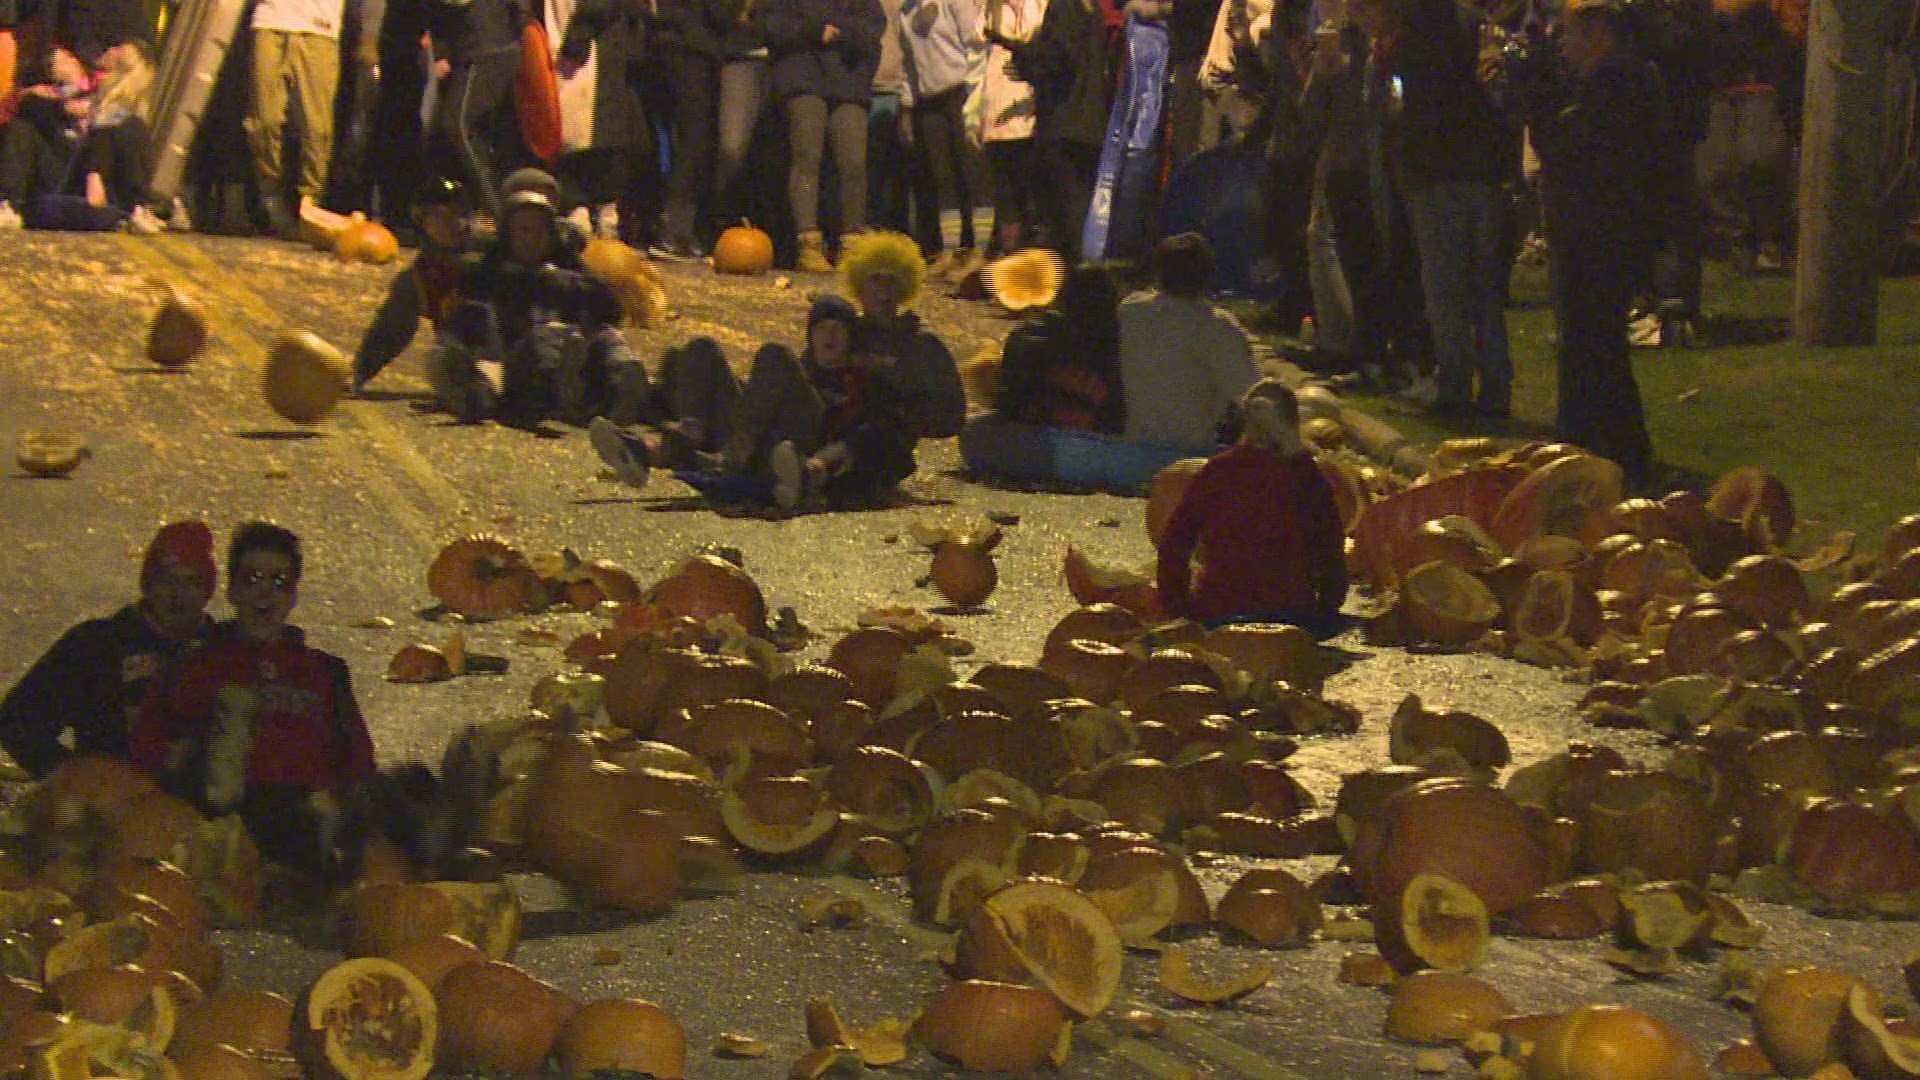 Oct. 26, 2017: Pumpkin carnage was everywhere. Slimy, orange guts covered Grove Hill in what has become a Halloween season tradition known as the Chagrin Falls pumpkin roll.